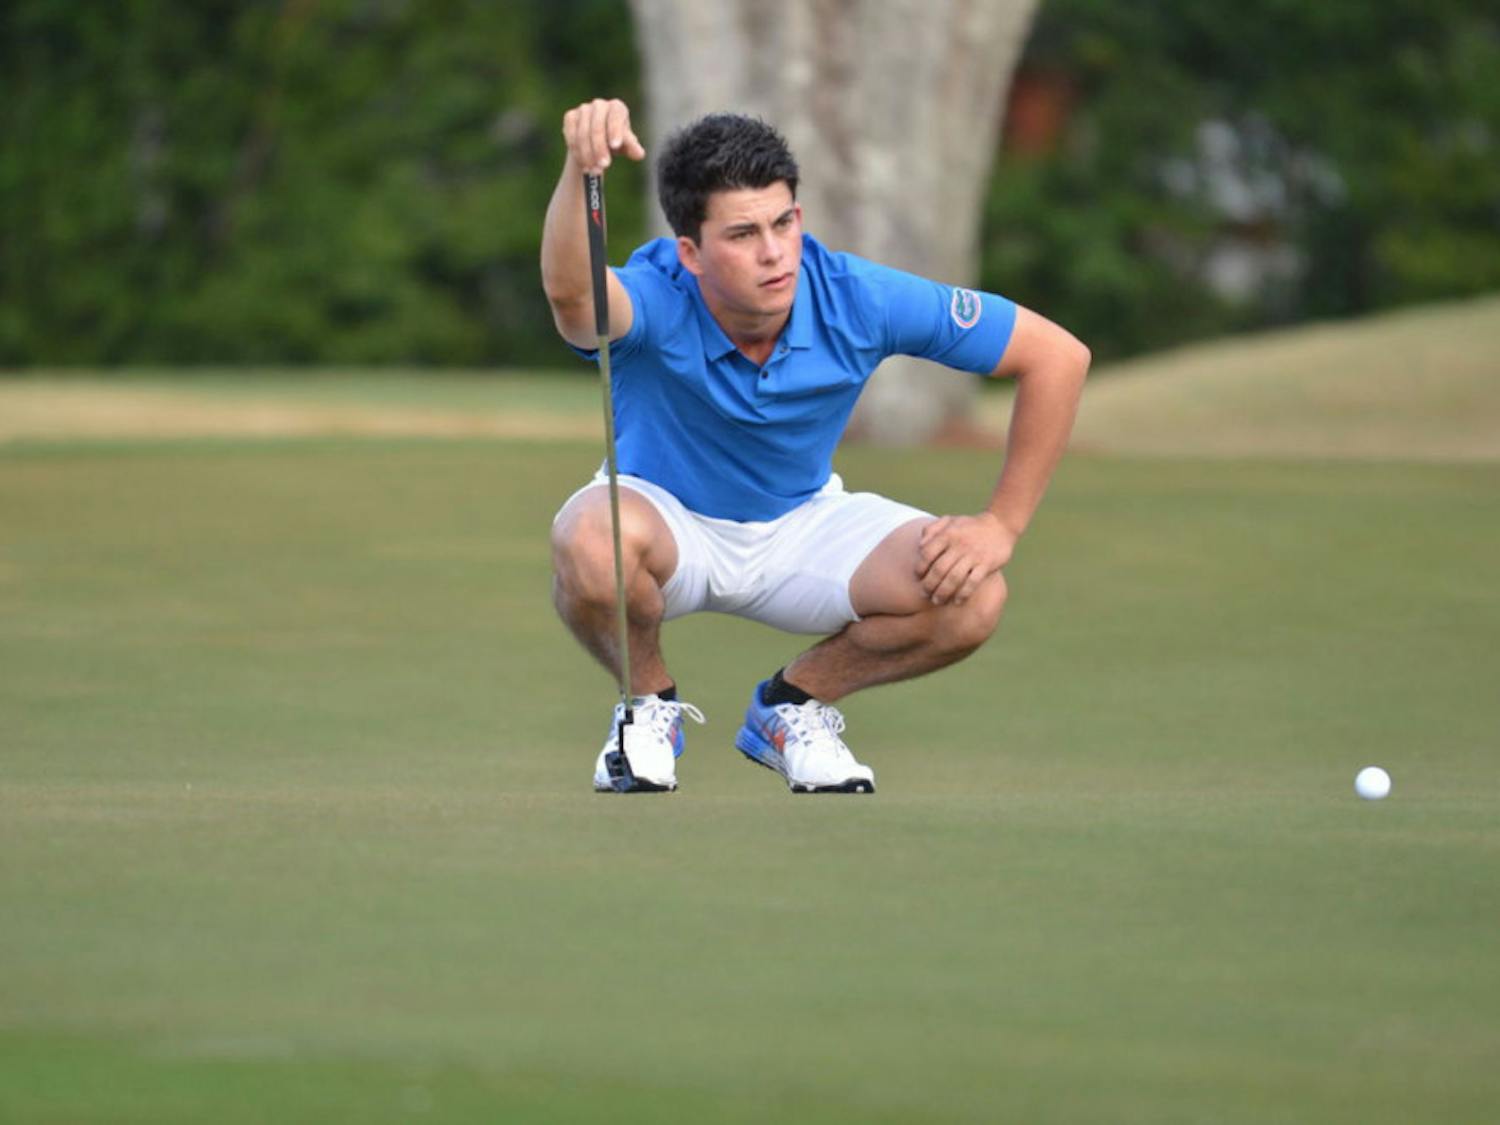 Gordon Neale finished over par for the second day in a row at the Tavistock Collegiate Invitational with a 5-over round on Monday. UF dropped from fifth to 10th and no Gator broke even in the second round. 